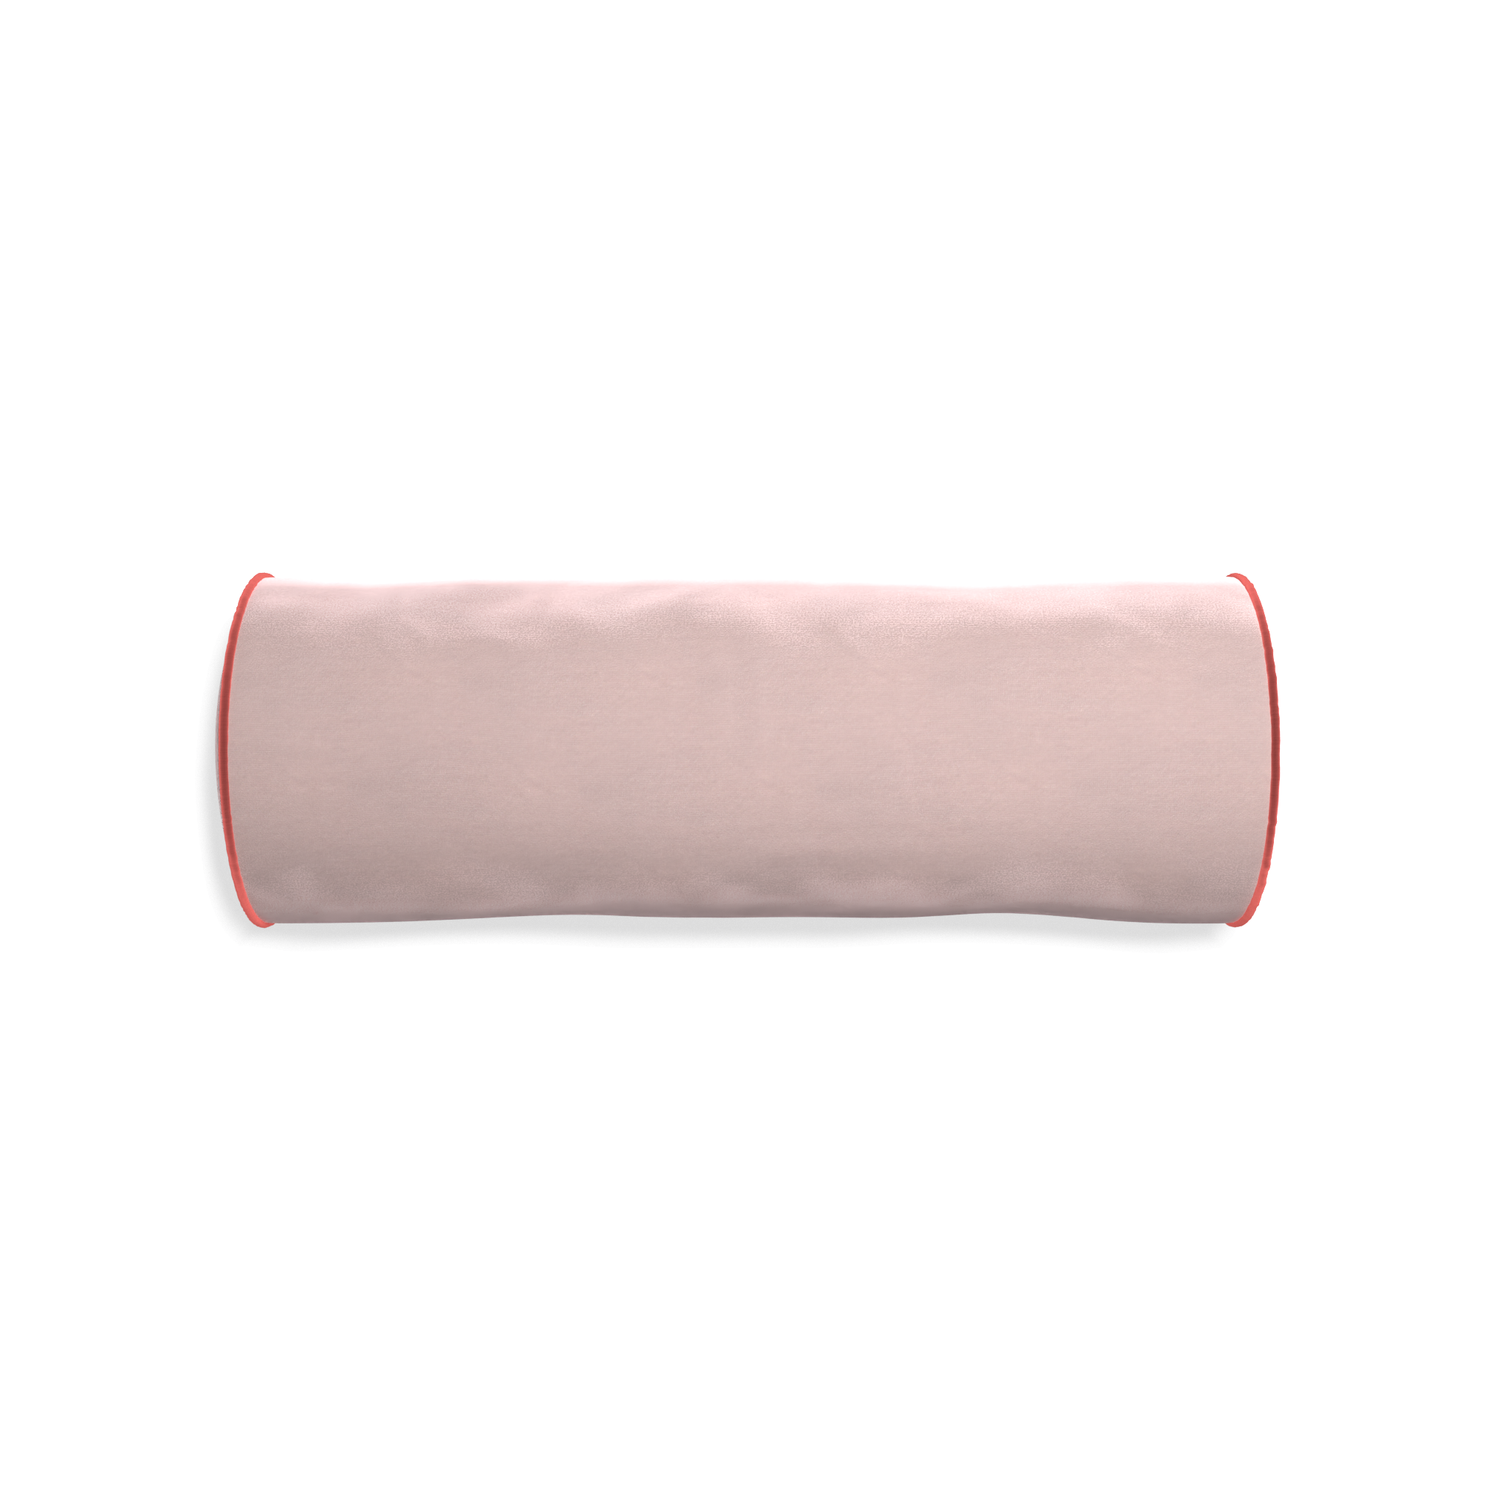 bolster light pink velvet pillow with coral piping